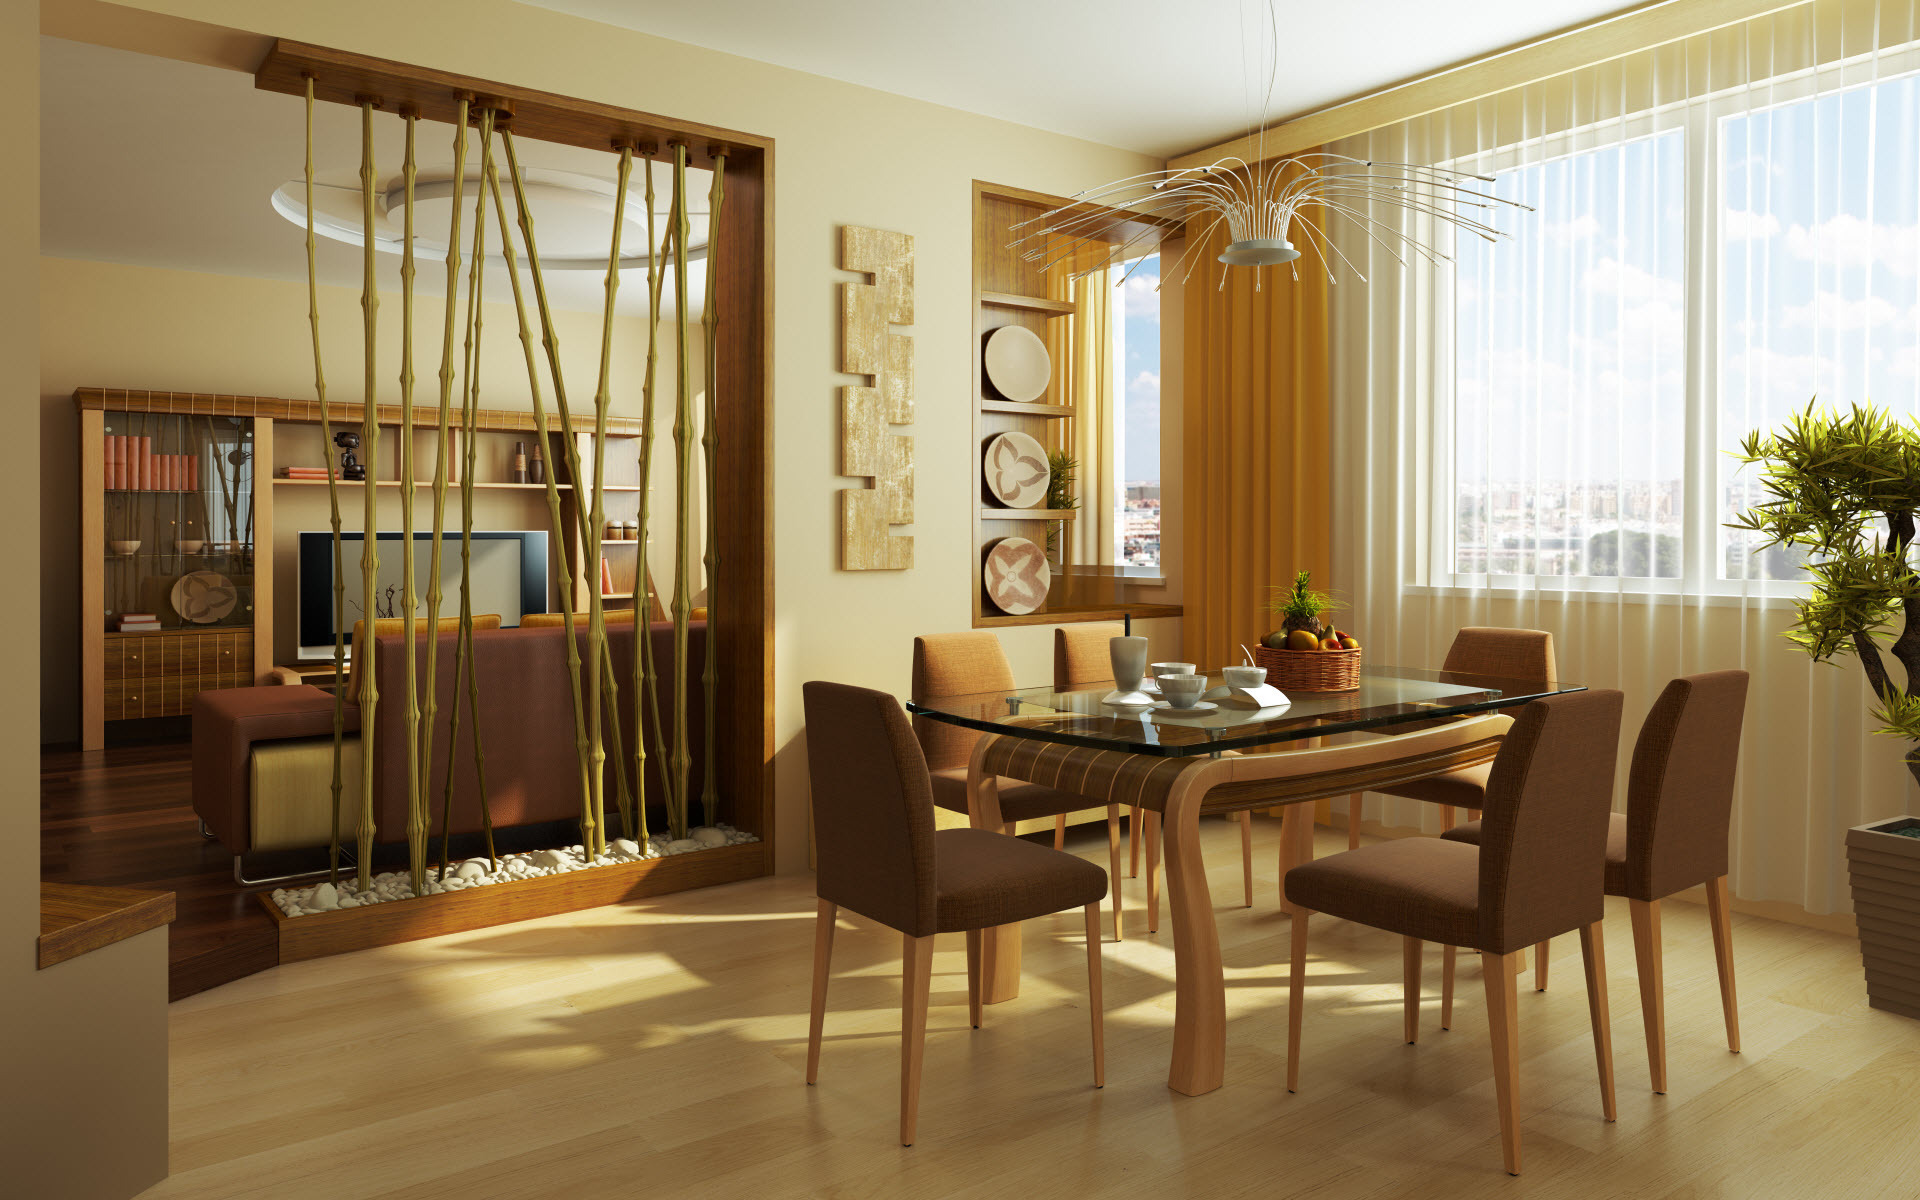 wallpaper with bamboo in the design of the room